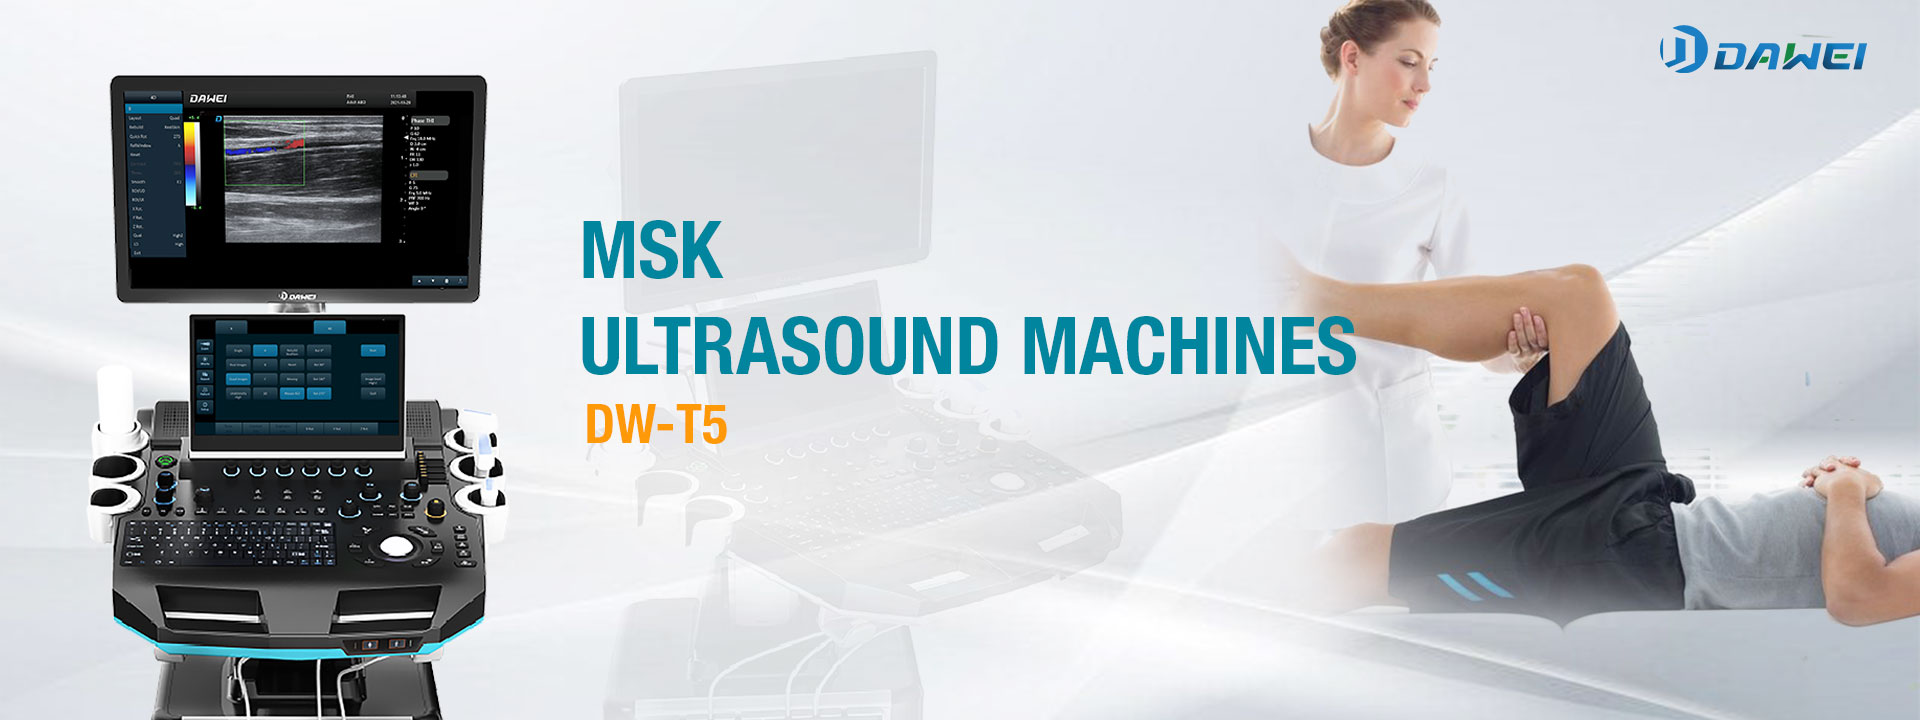 Advancing Diagnoses with MSK Ultrasound Machines